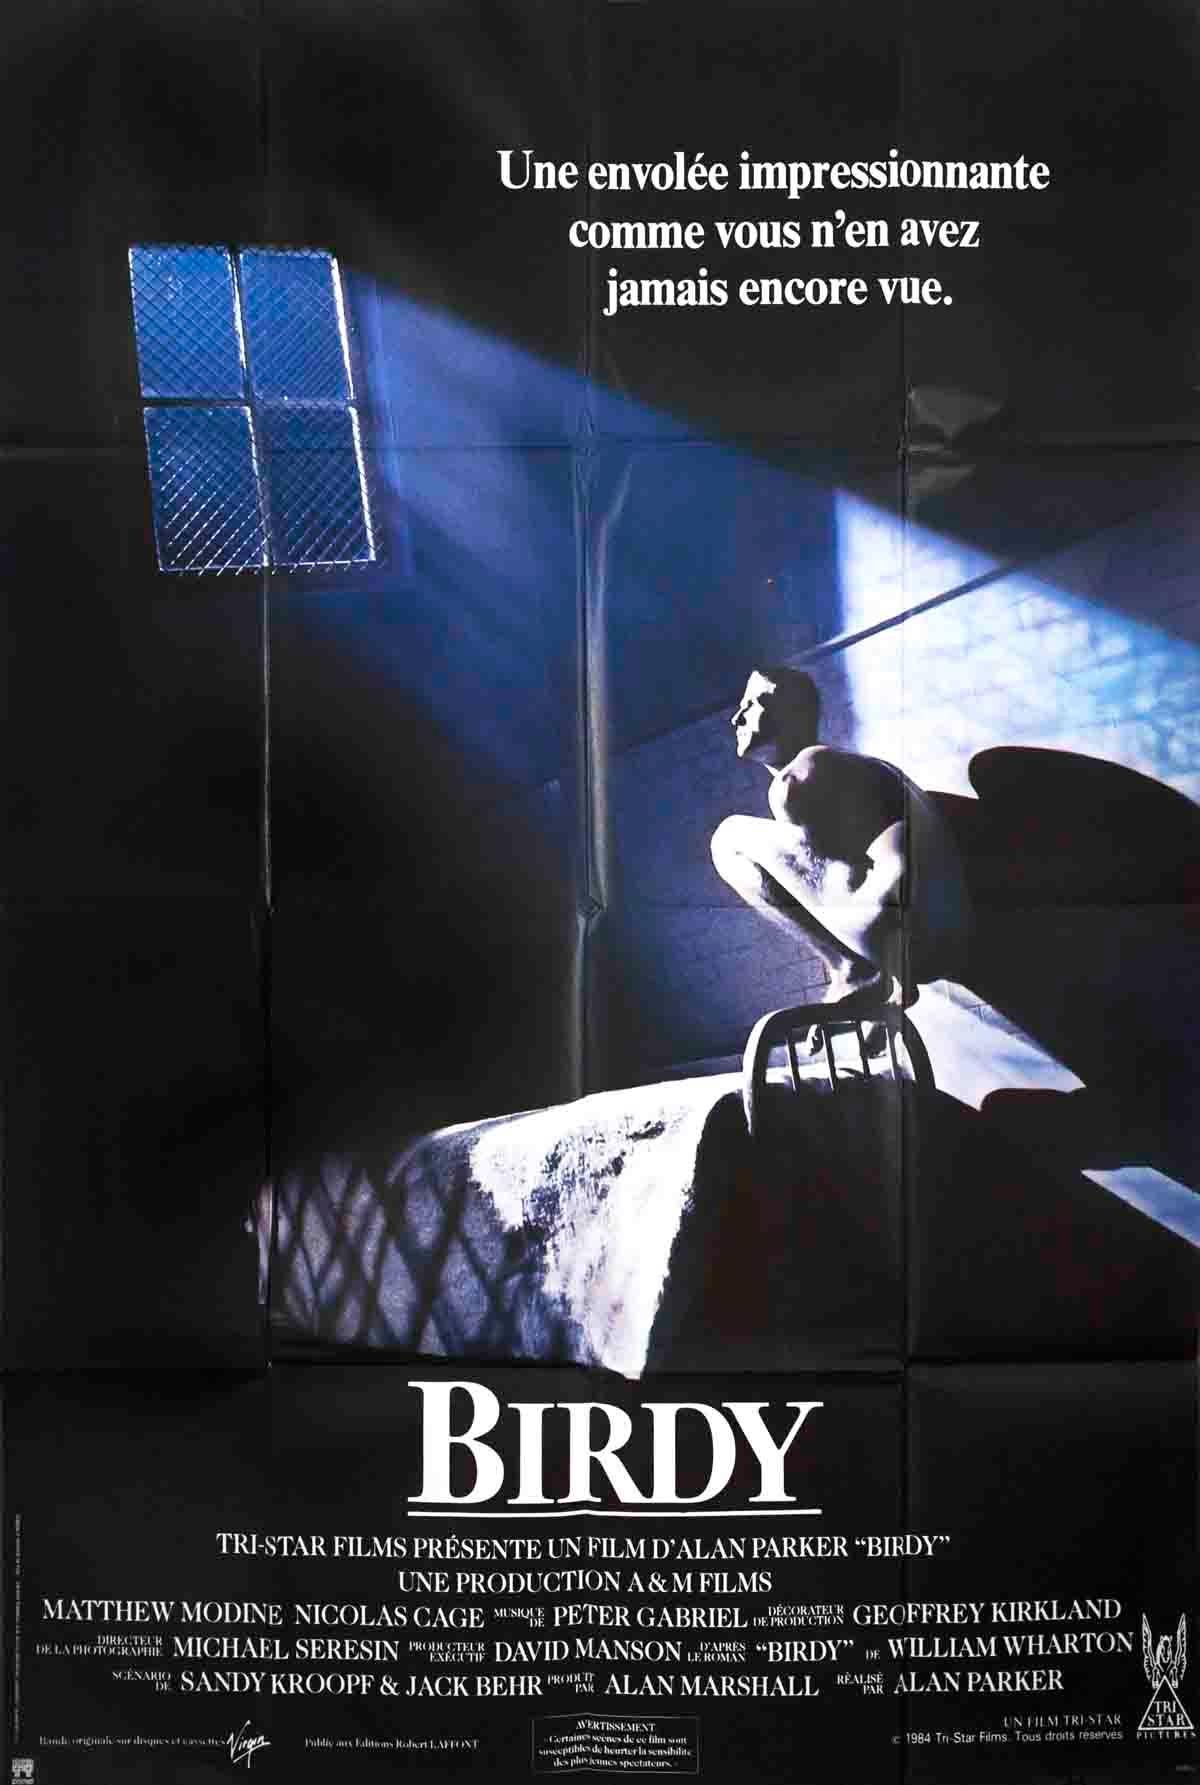 Birdy The Movie Poster-1984 - Print by Unknown